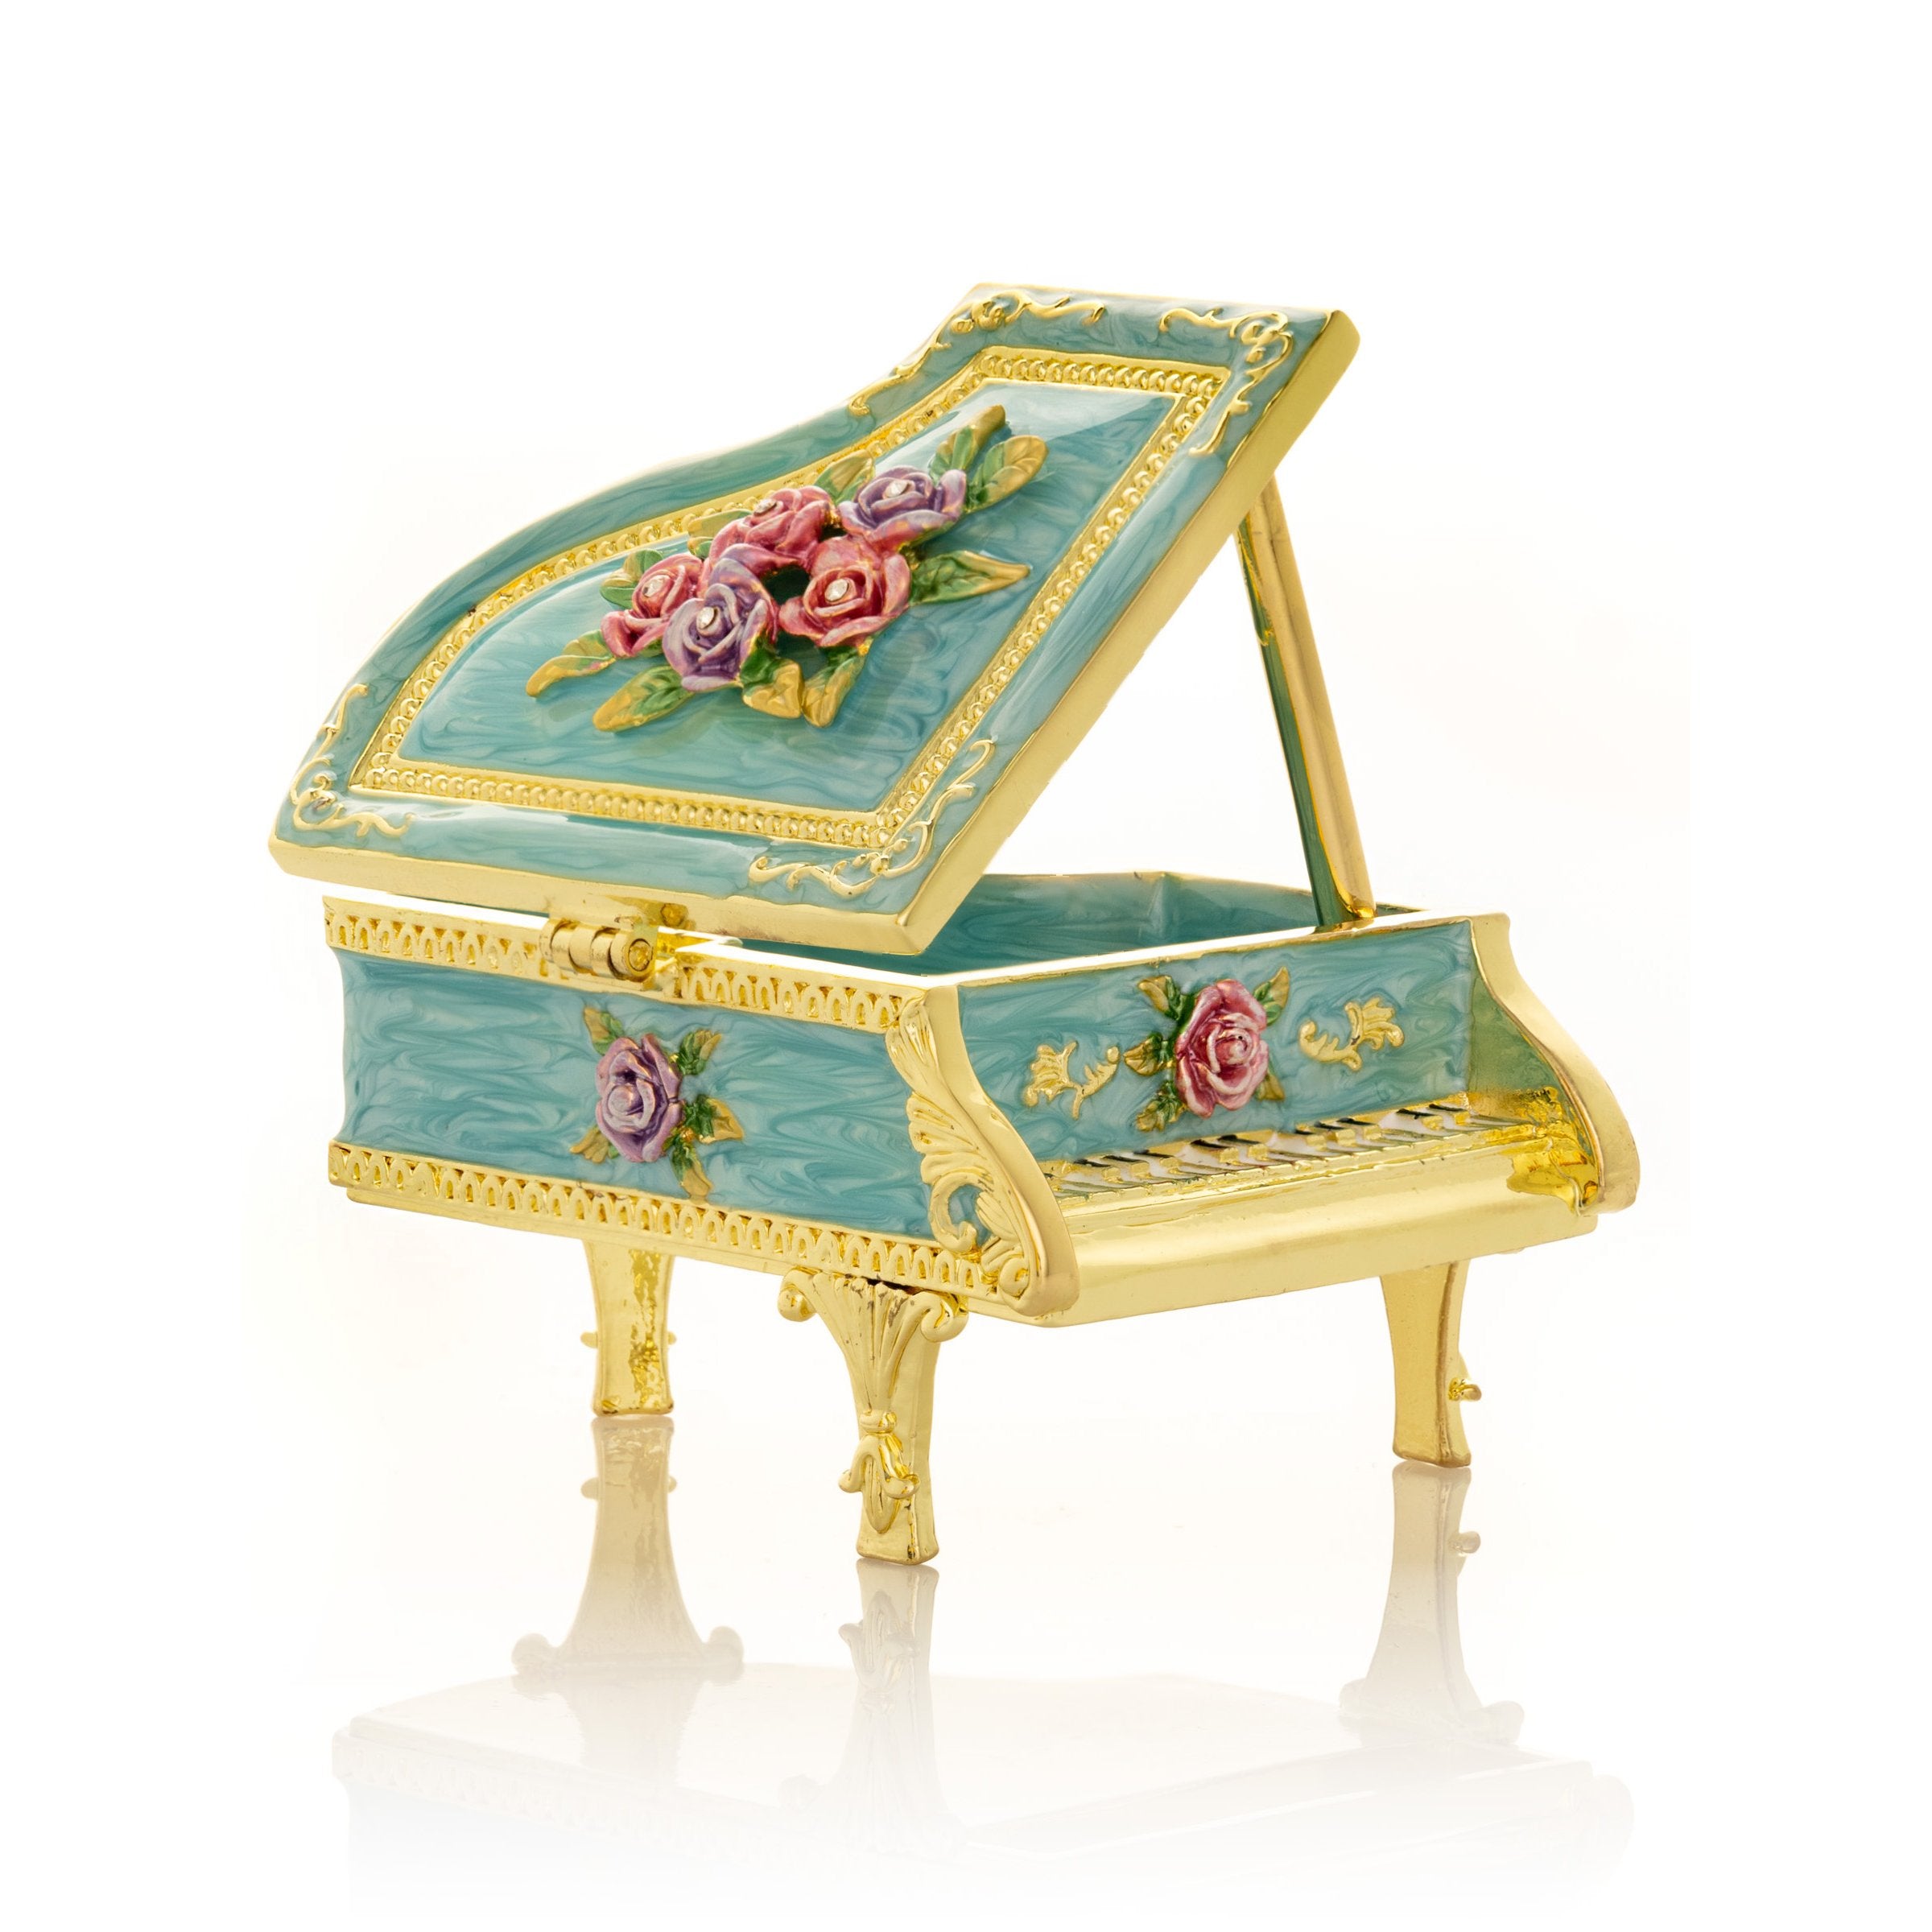 Turquoise Piano with Flowers-0